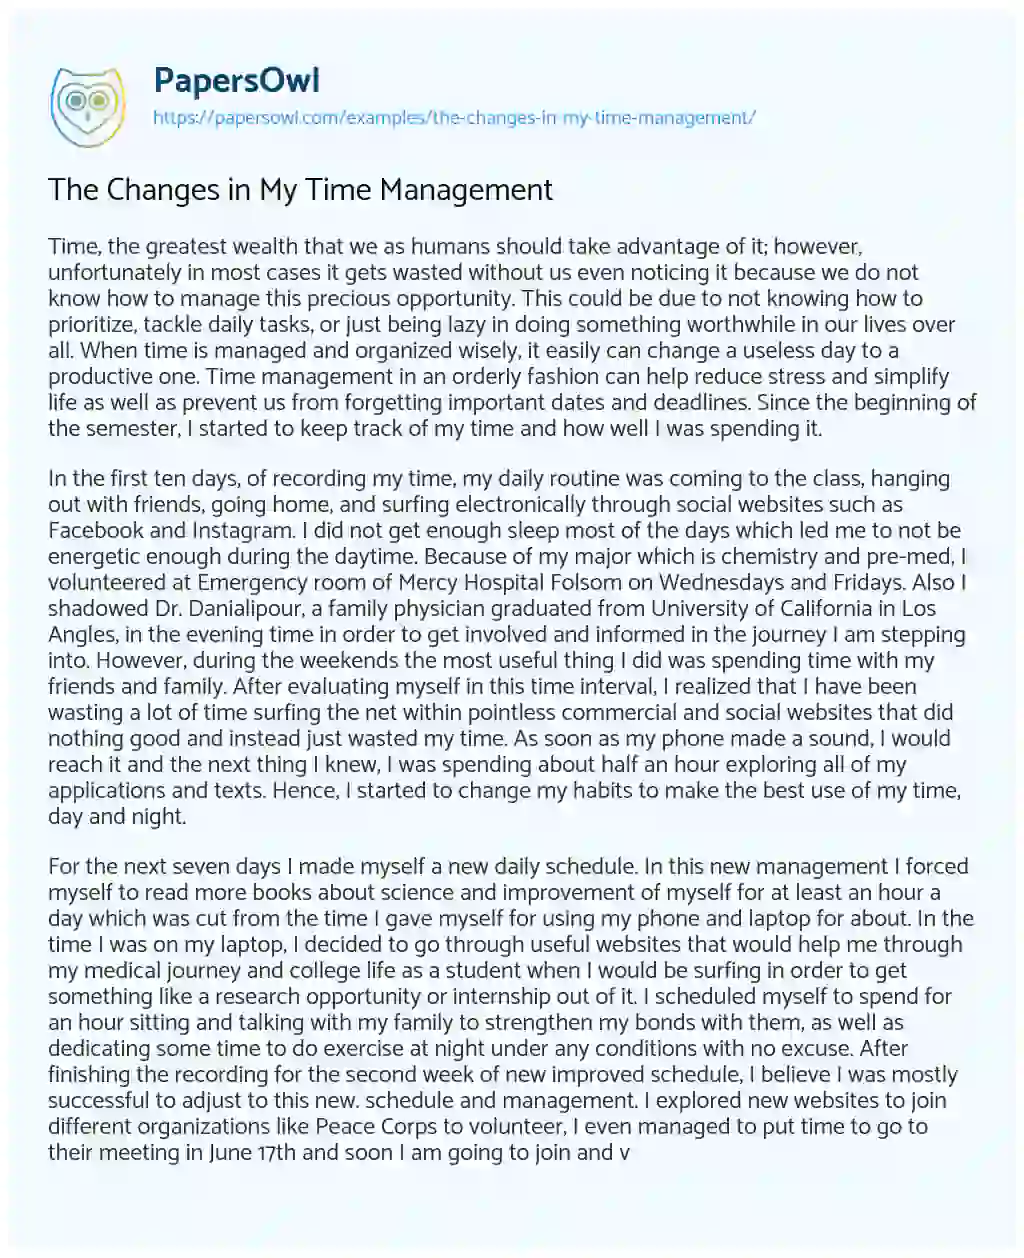 Essay on The Changes in my Time Management